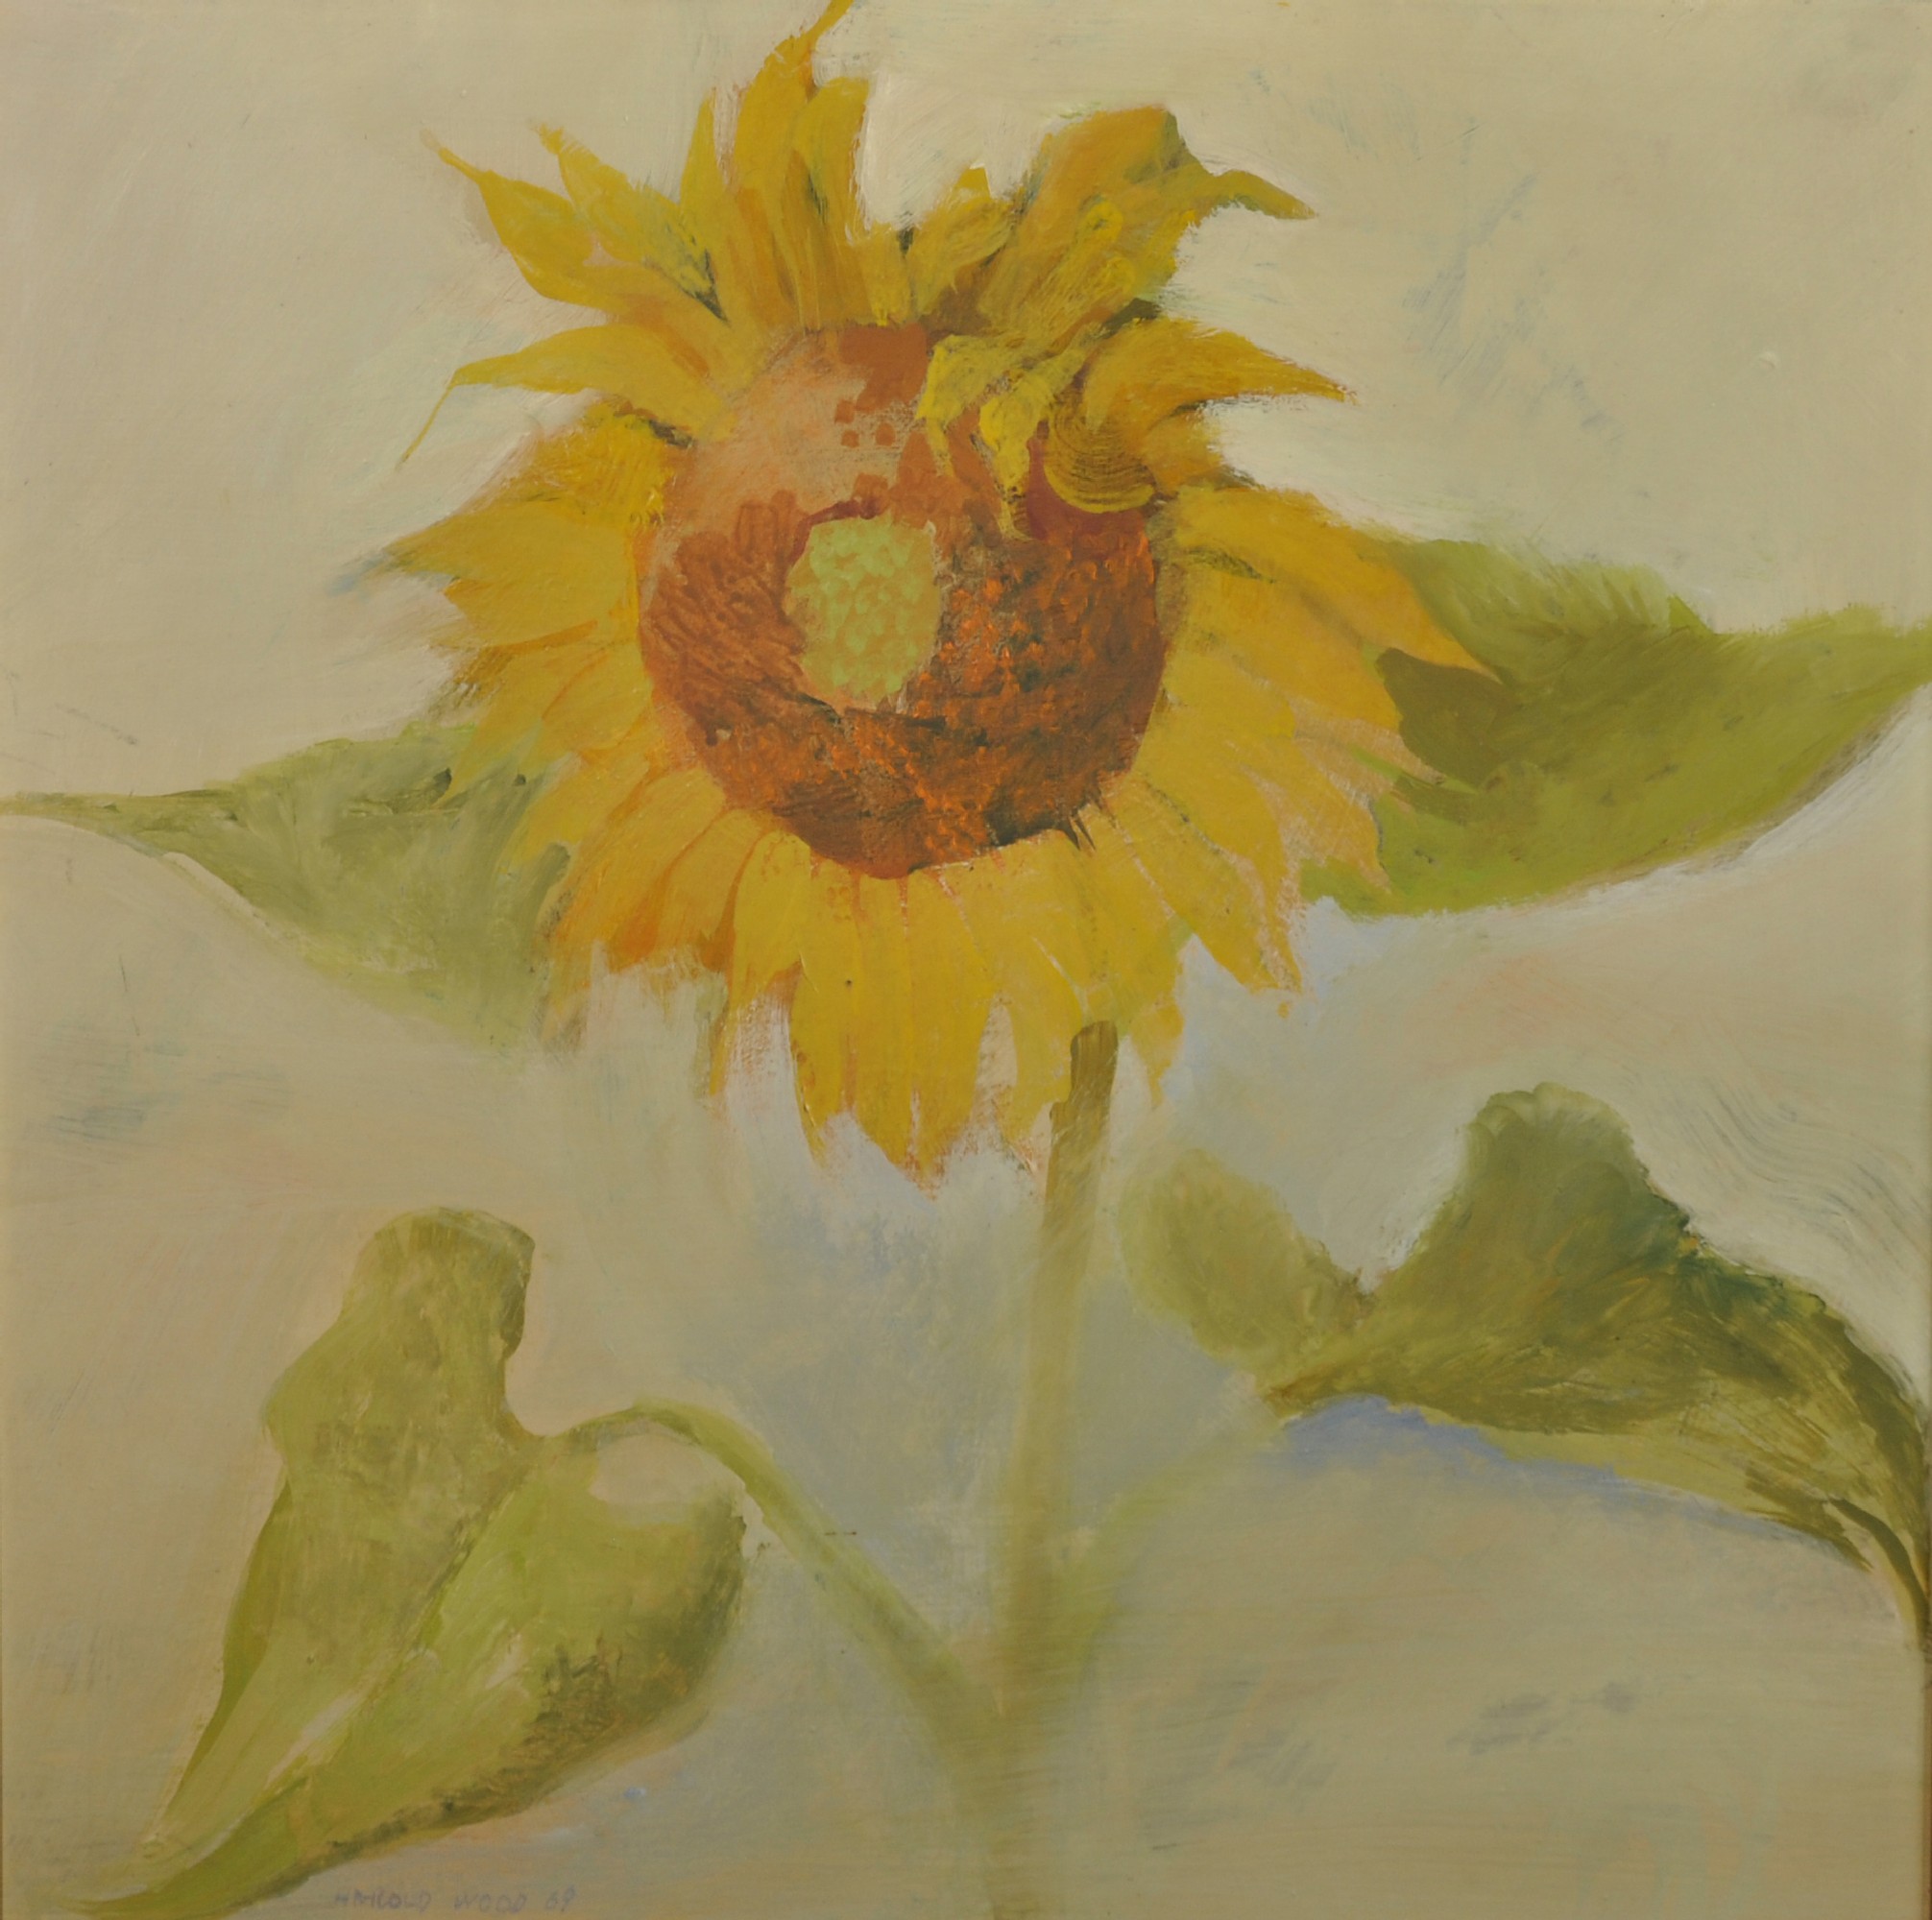 Harold Wood (1918-2014) British. Study of a Sunflower, Oil on Board, Signed and Dated '69, 18" x